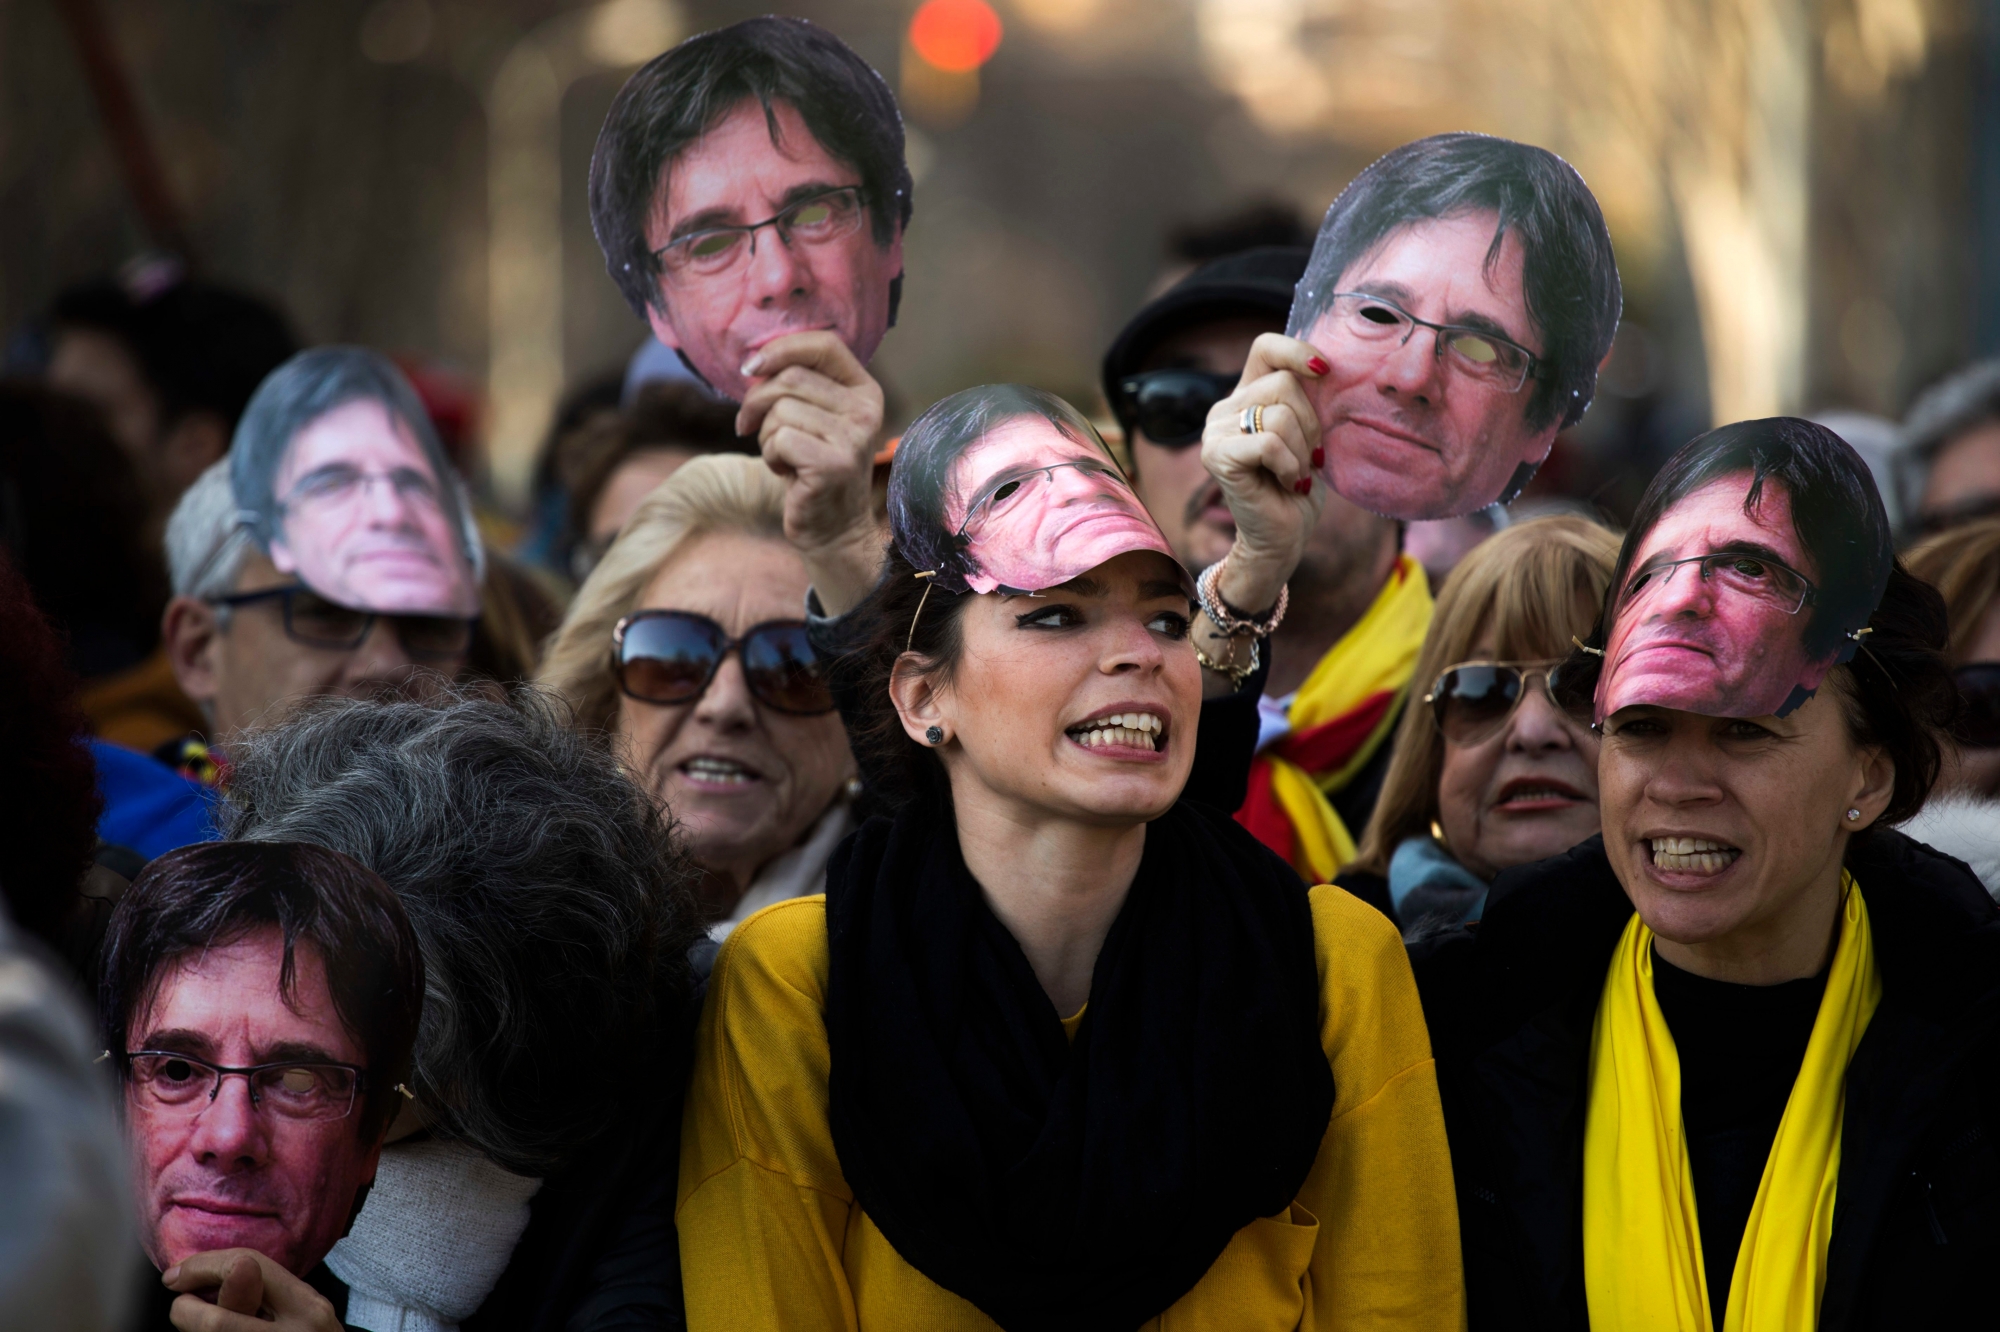 Demonstrators wearing masks of Catalonia's ex-president Carles Puigdemont shout slogans during a protest outside the Catalonia parliament in Barcelona, Spain, Tuesday, Jan. 30, 2018. Plans by Catalan separatist lawmakers to re-elect fugitive ex-president Tuesday received a setback when the house speaker postponed the session, saying the planned parliament meeting would not take place until there were guarantees Spanish authorities "won't interfere." (AP Photo/Emilio Morenatti) Spain Catalonia